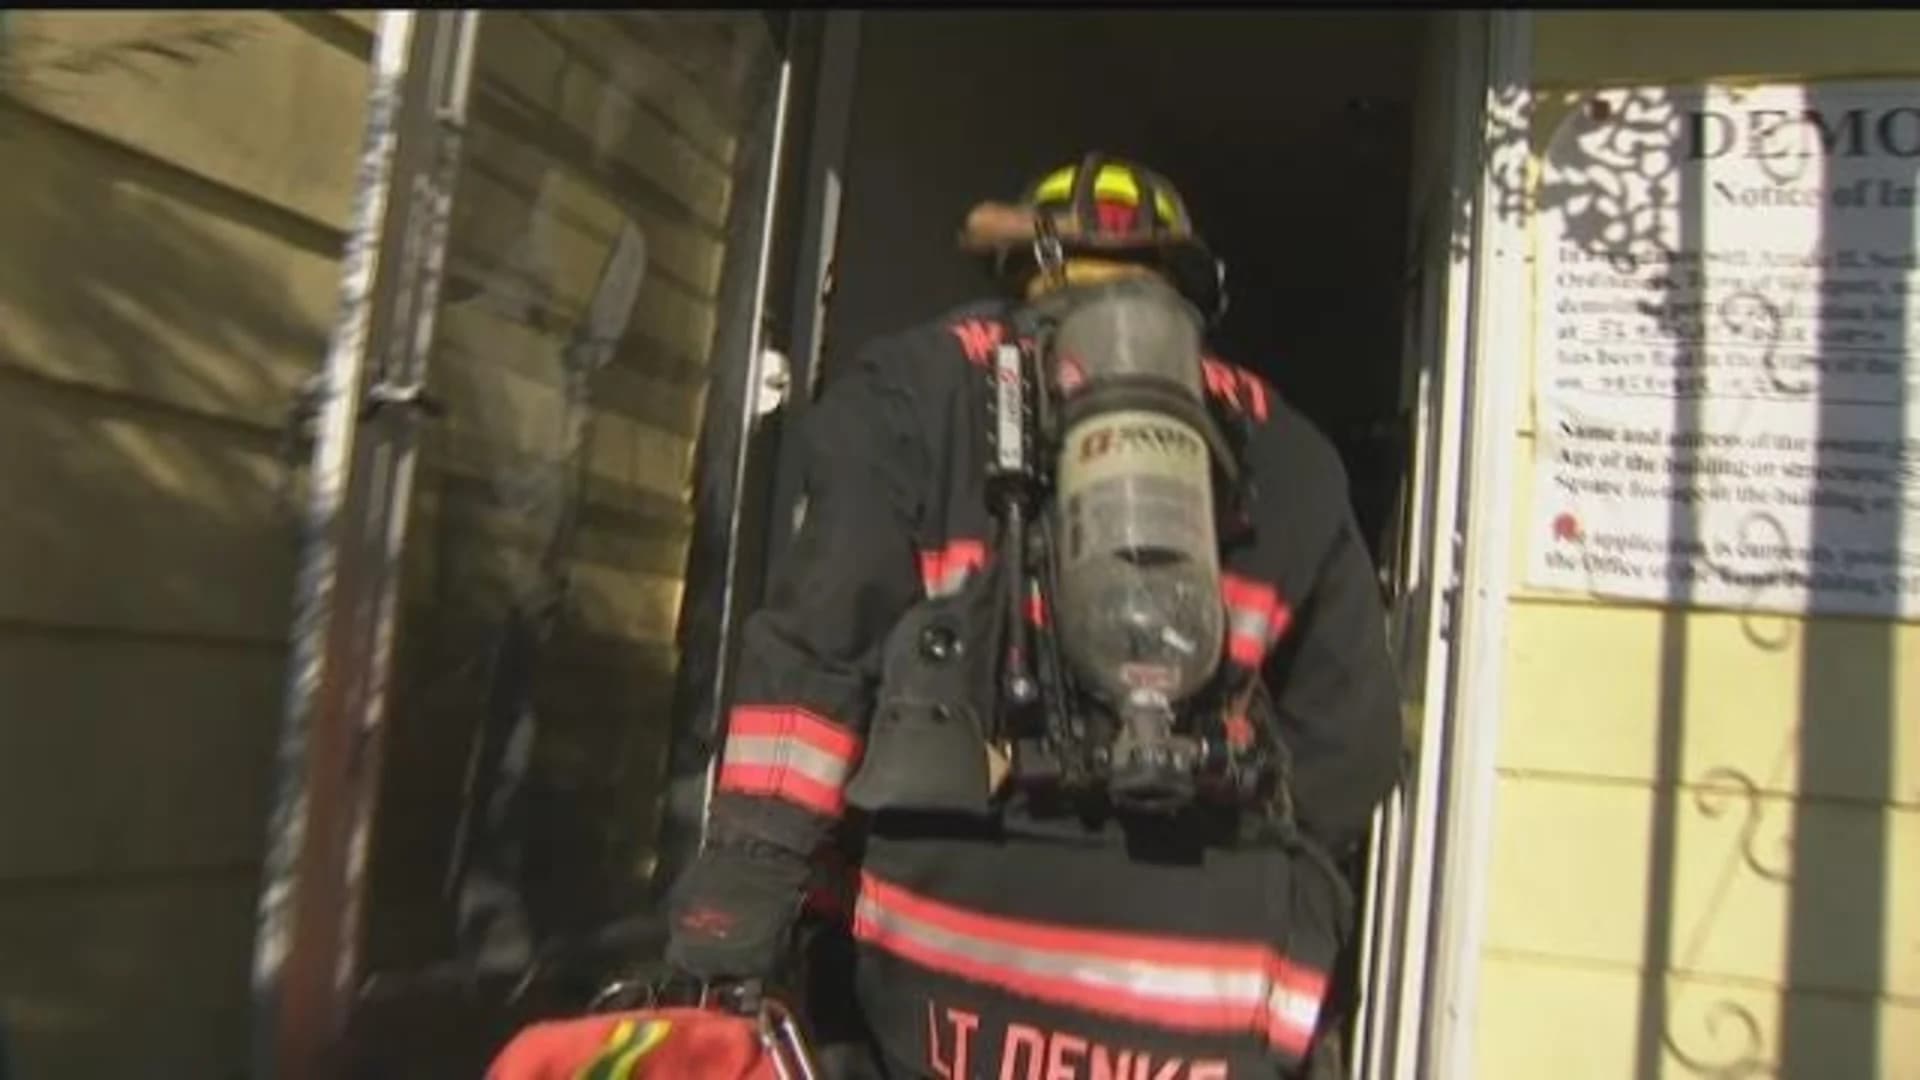 Westport firefighters train in home slated for demolition